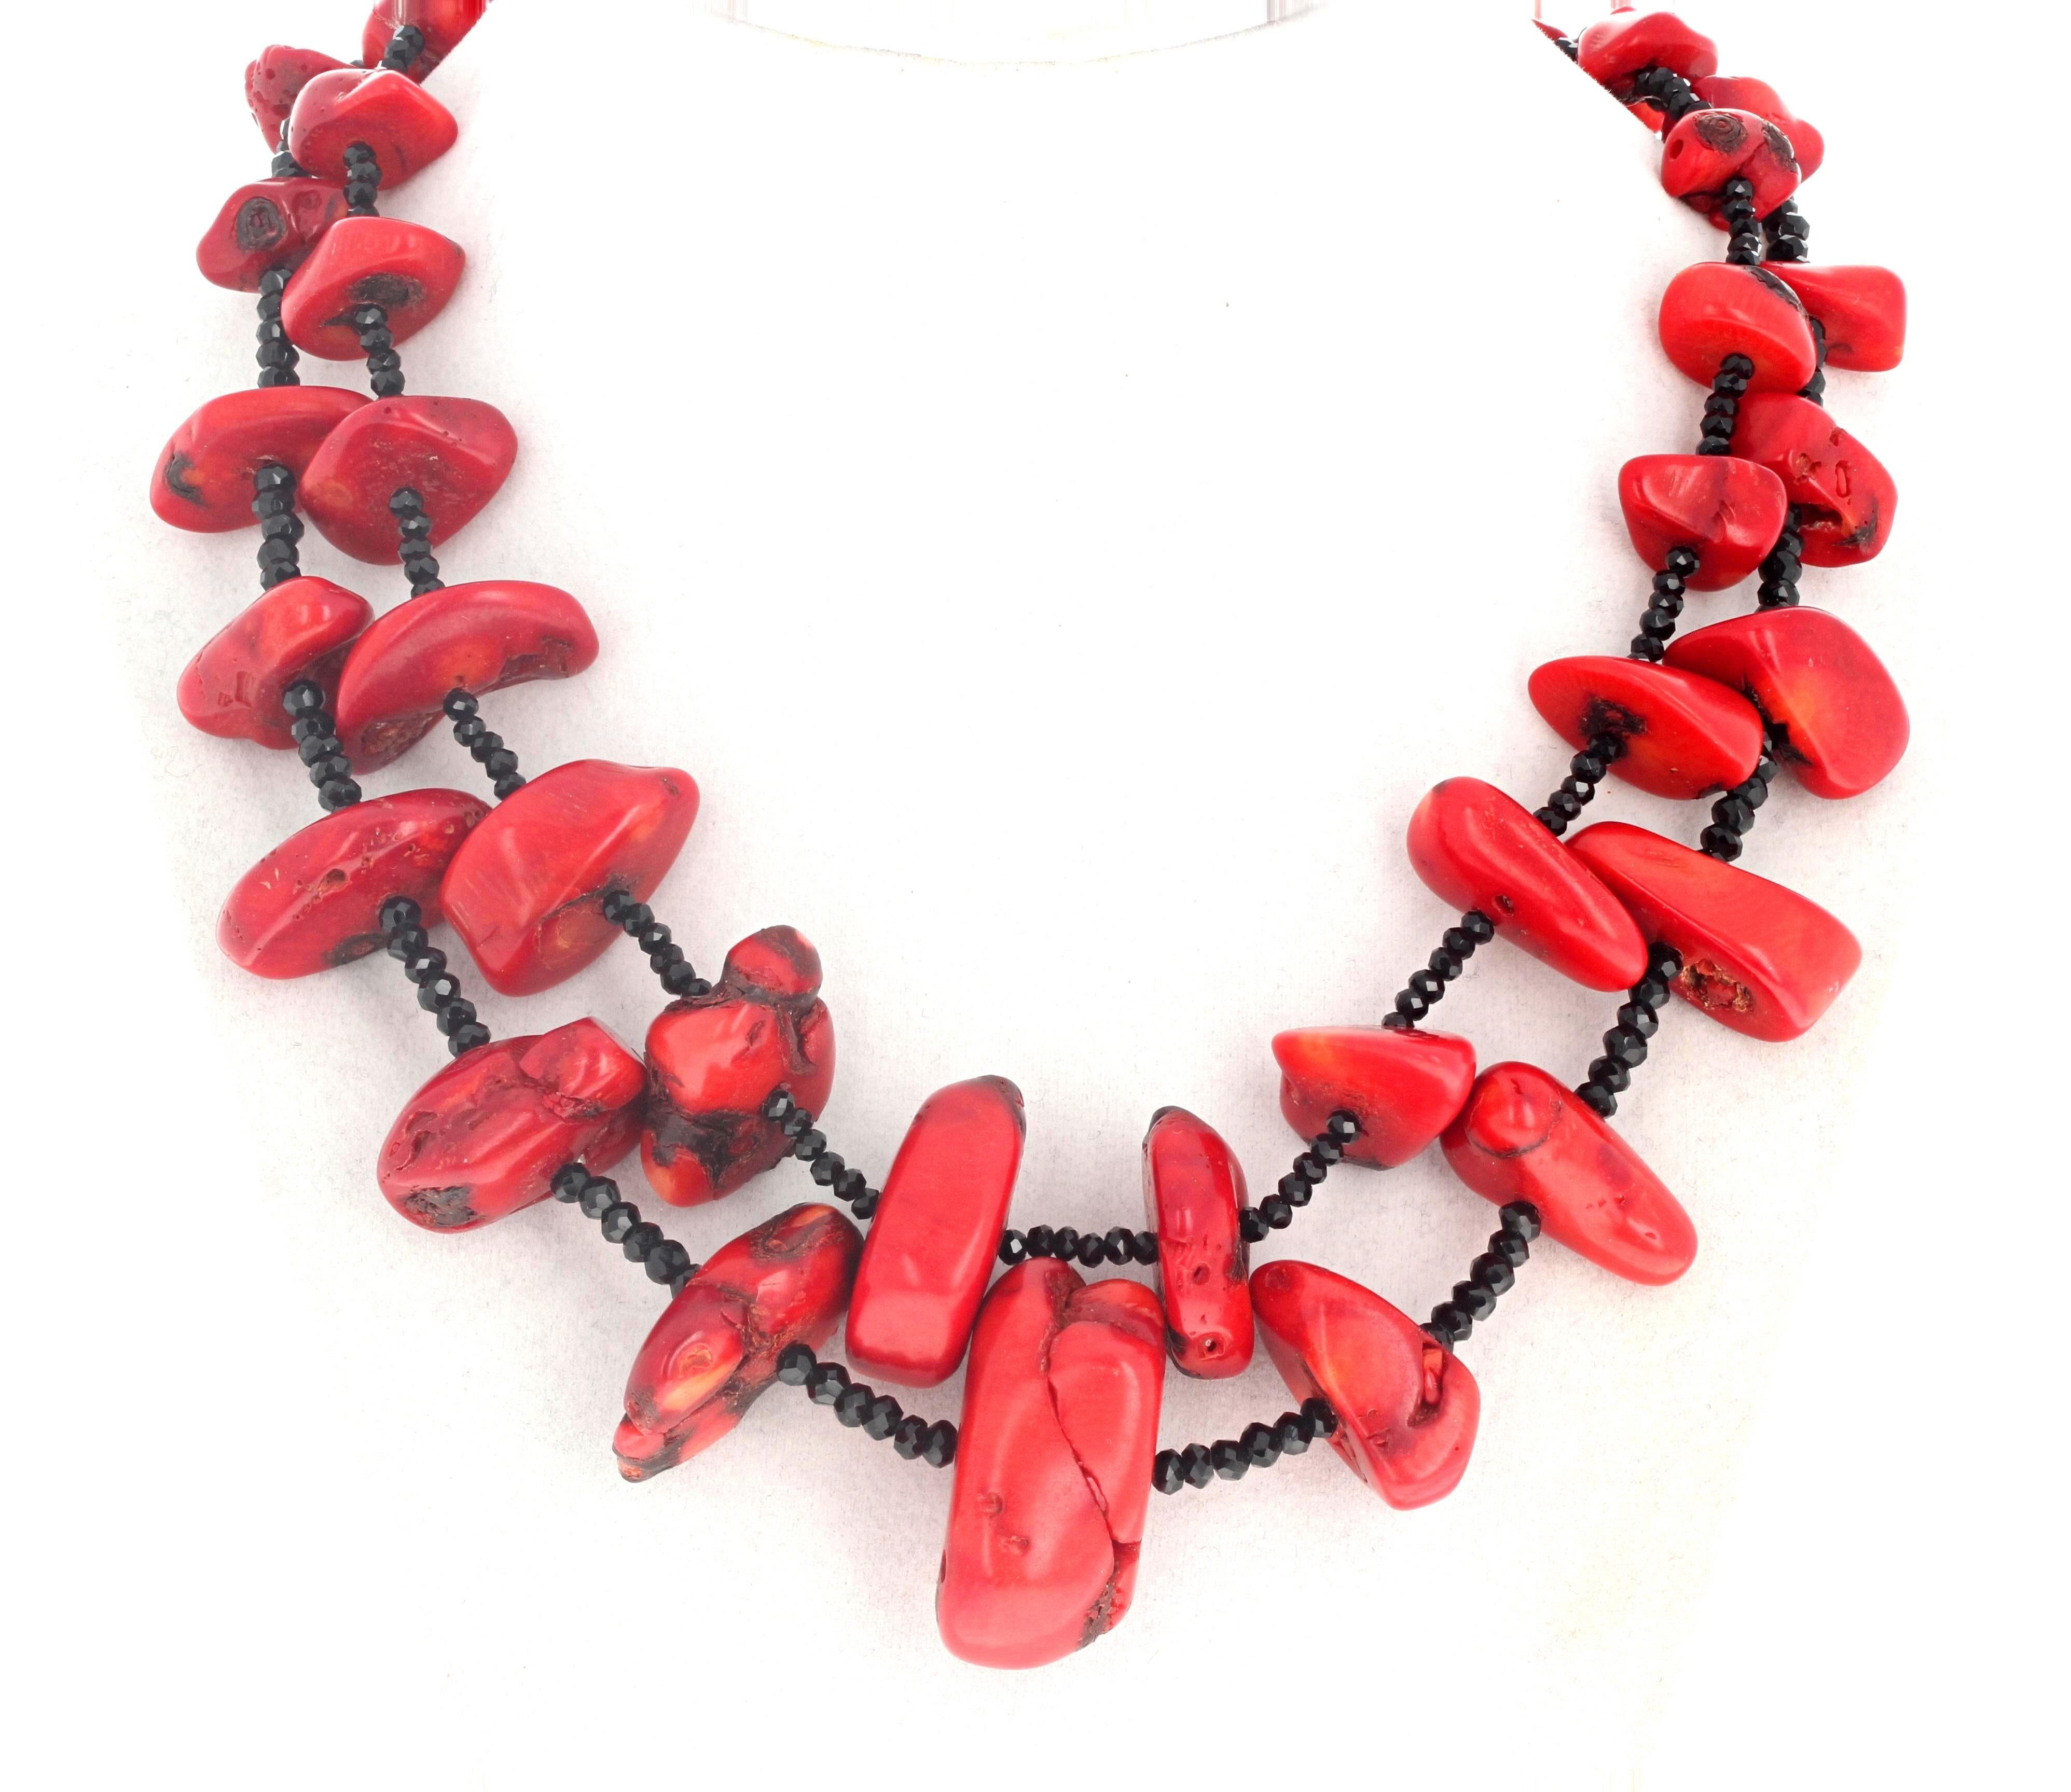 Mixed Cut AJD Real Coral Chunks & Real Gemcut Natural Sparkling Black Onyx Necklace For Sale